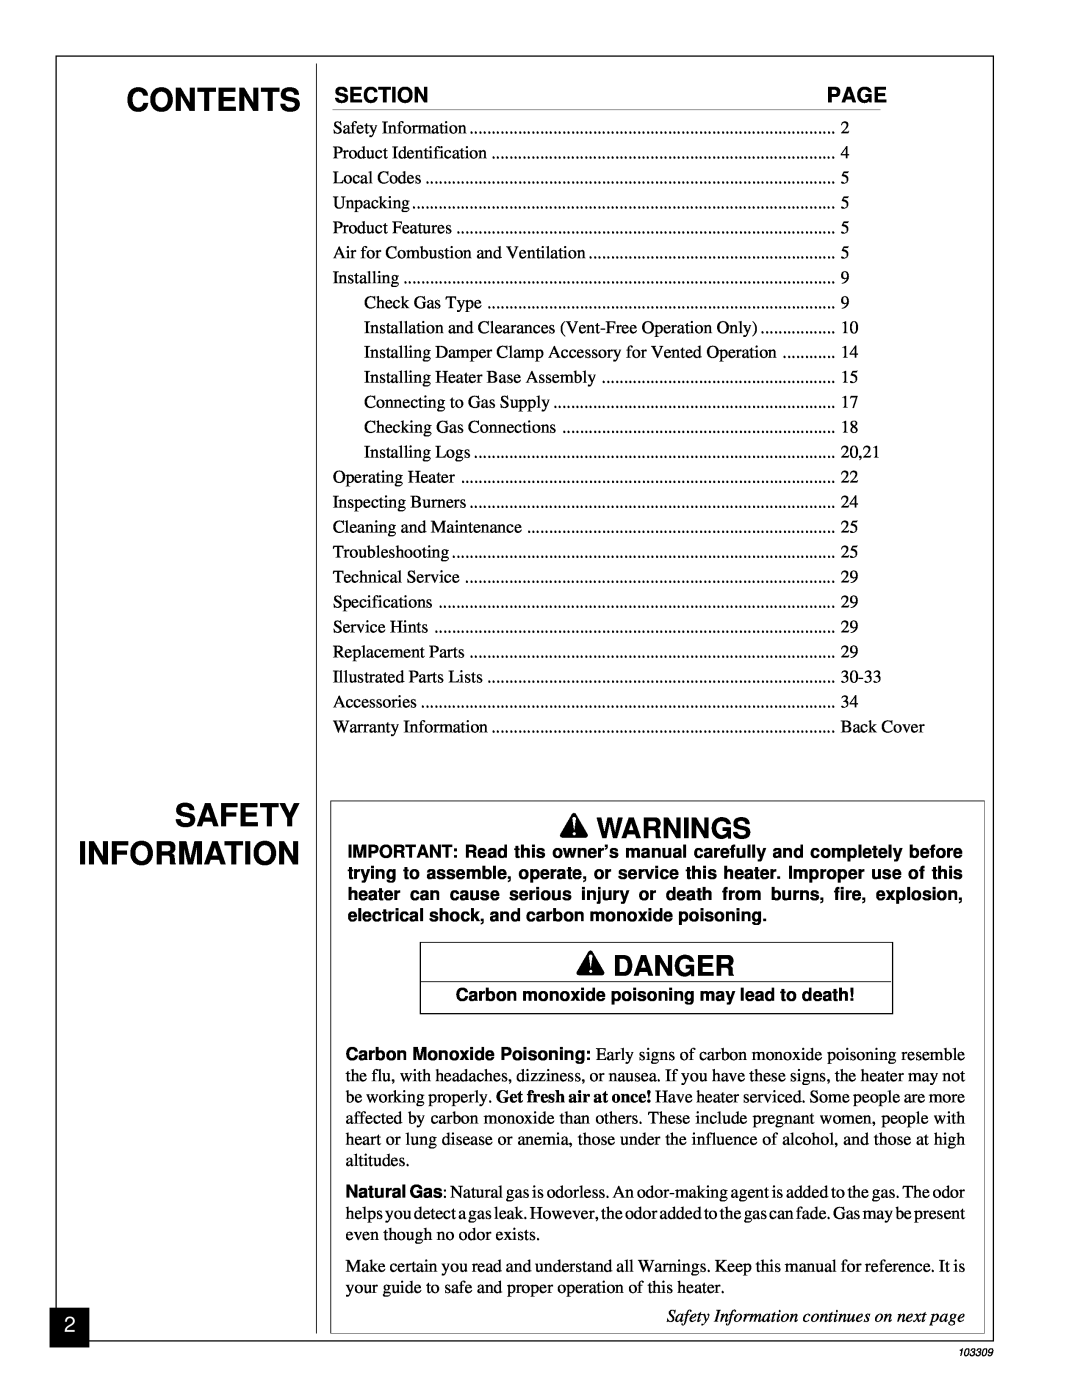 Desa UNVENTED (VENT-FREE) NATURAL GAS LOG HEATER installation manual Contents Safety Information, Warnings, Danger 